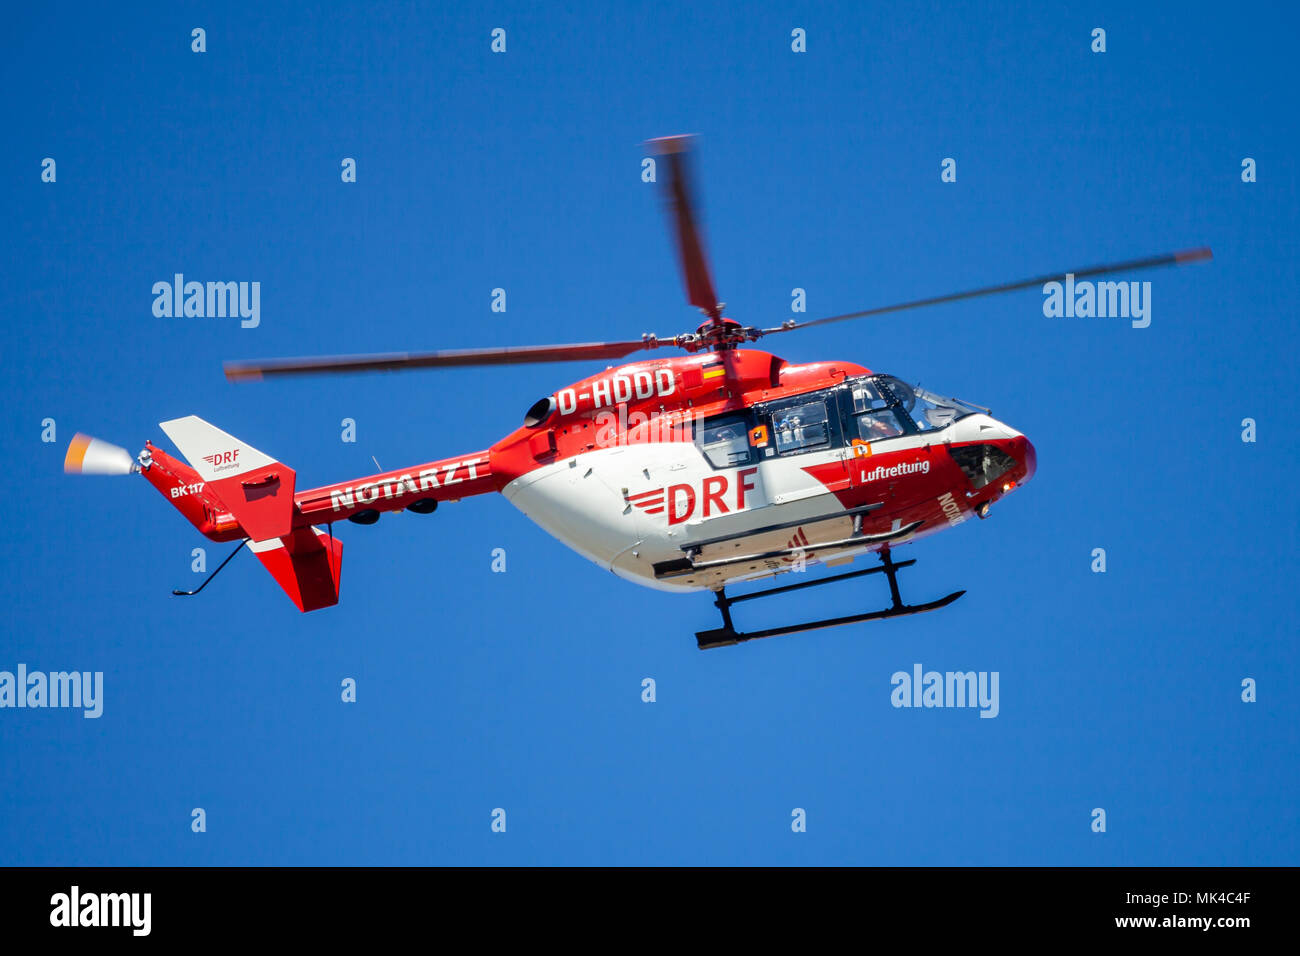 DELMENHORST / GERMANY - MAY 06, 2018: Eurocopter BK-117 from DRF Luftrettung flies over landing side. Notarzt means emergency doctor. Stock Photo